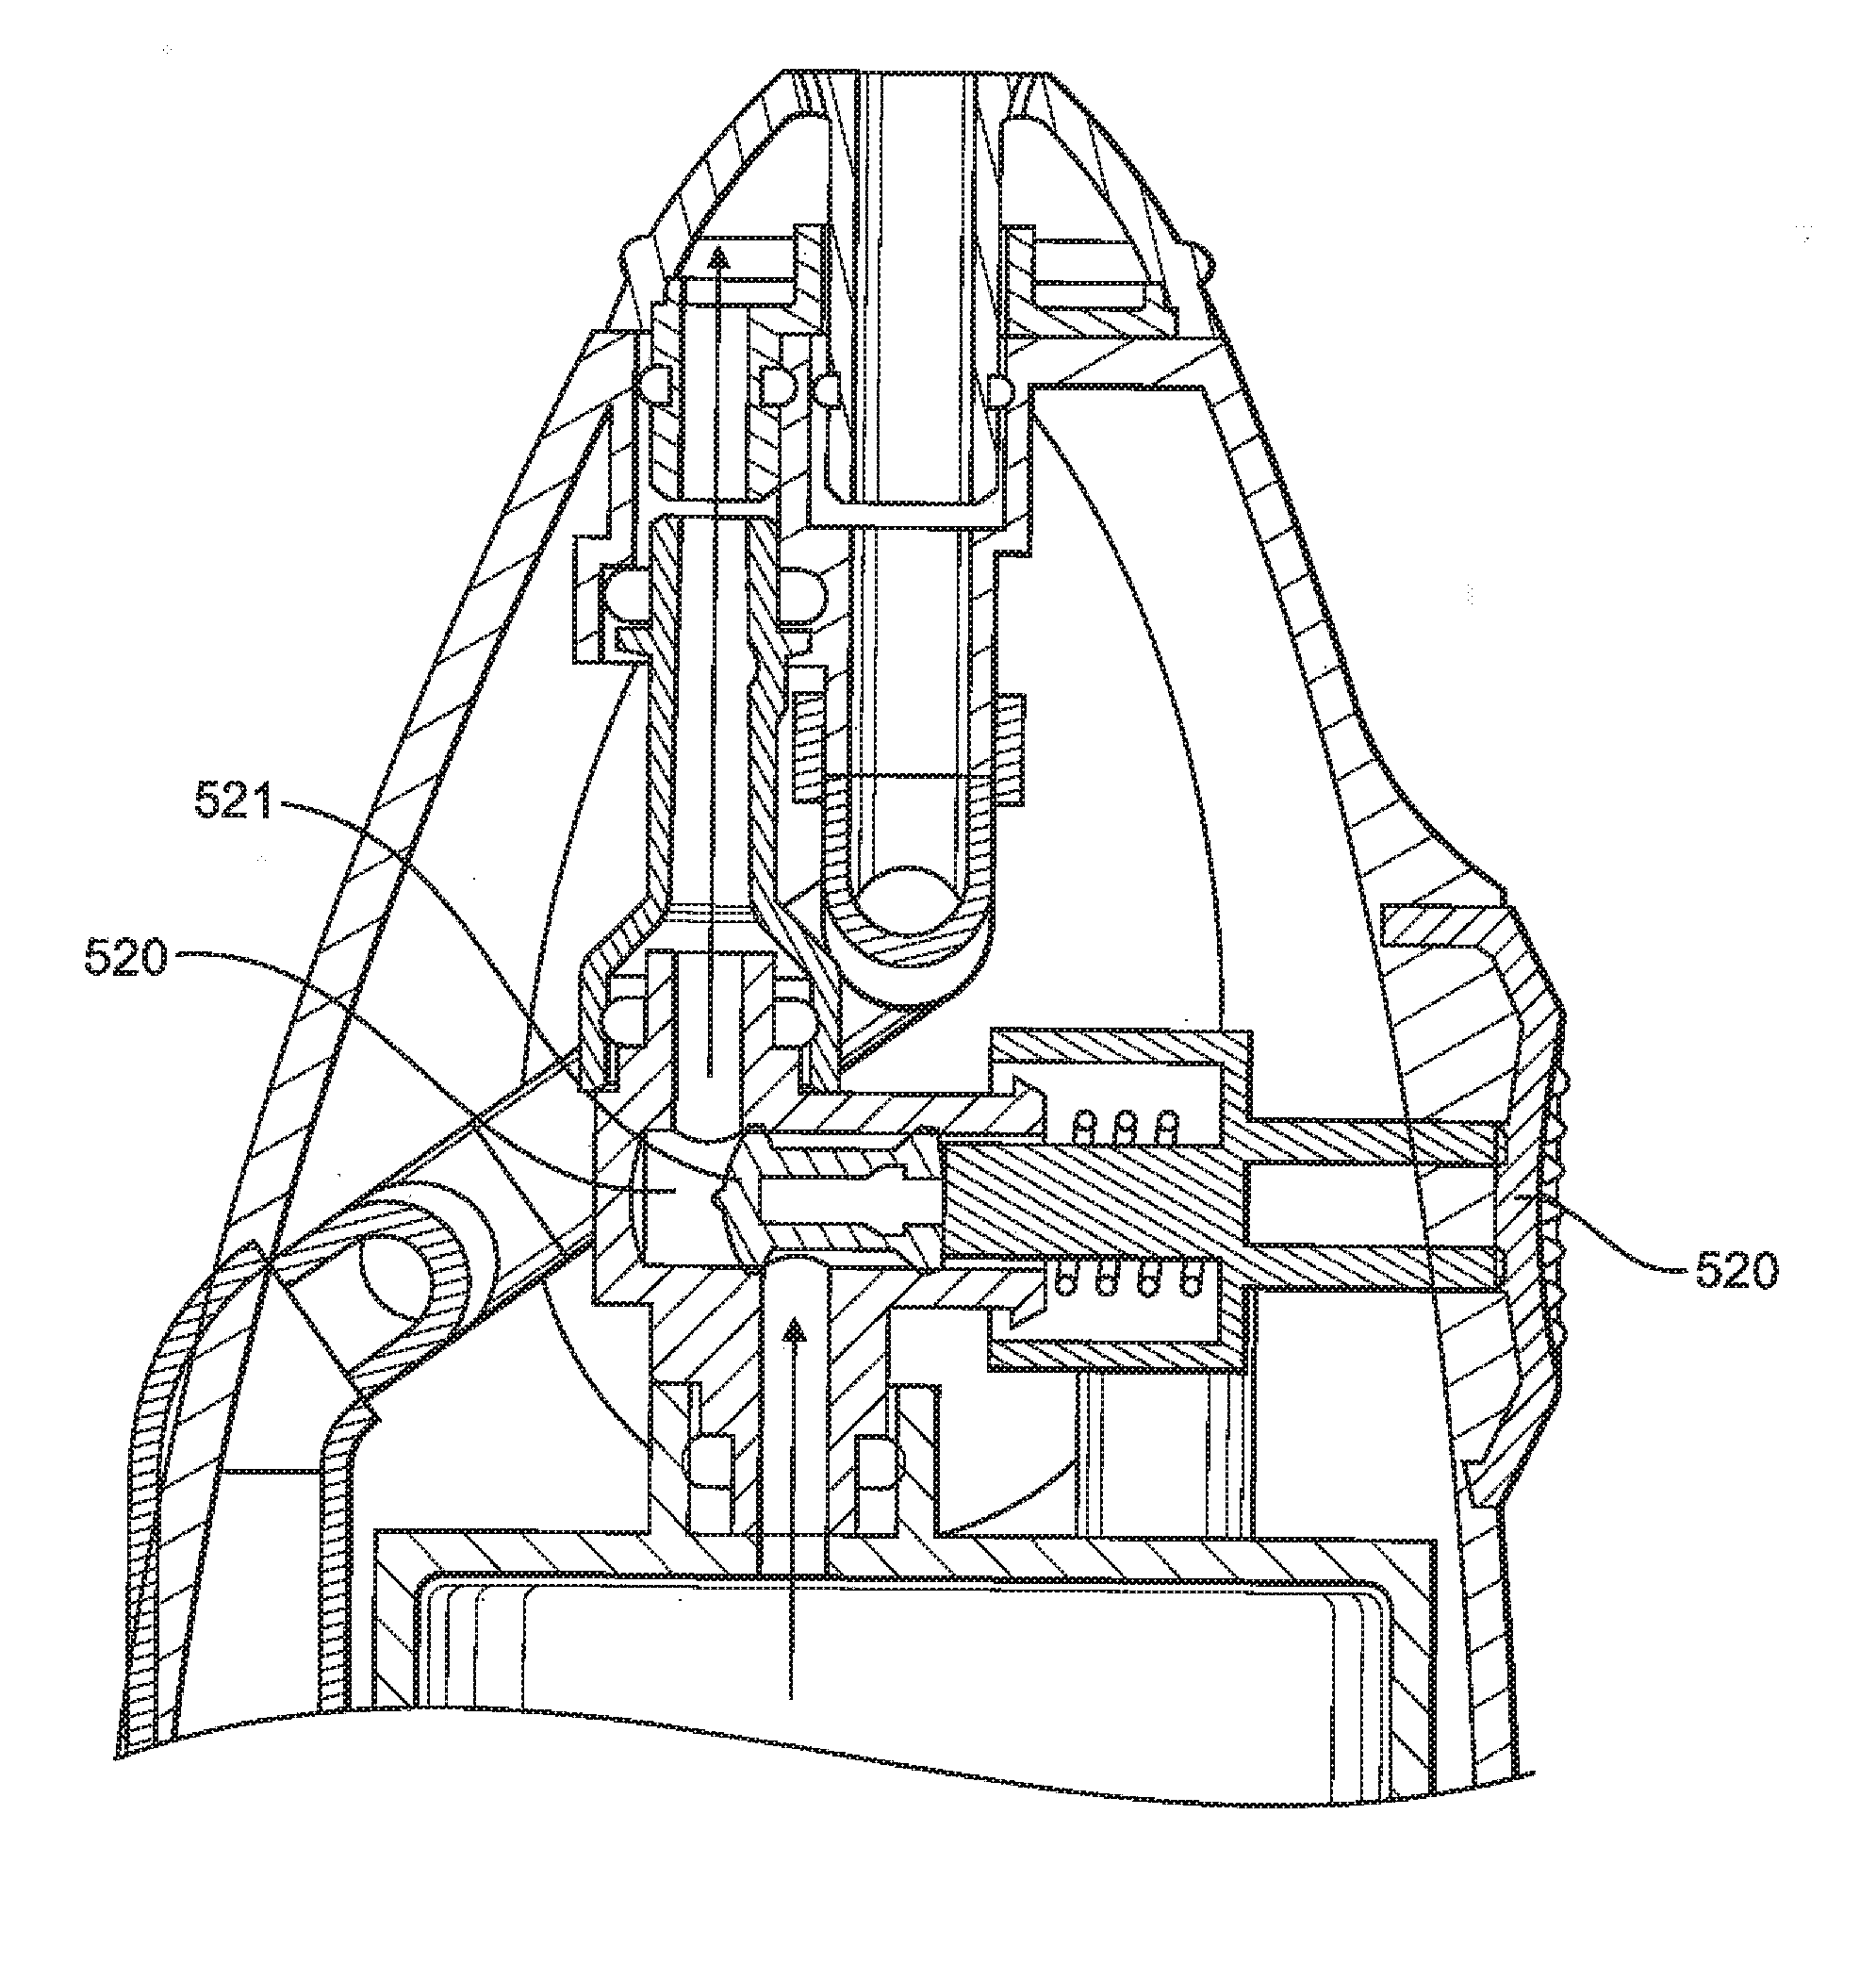 Nasal irrigation assembly and system